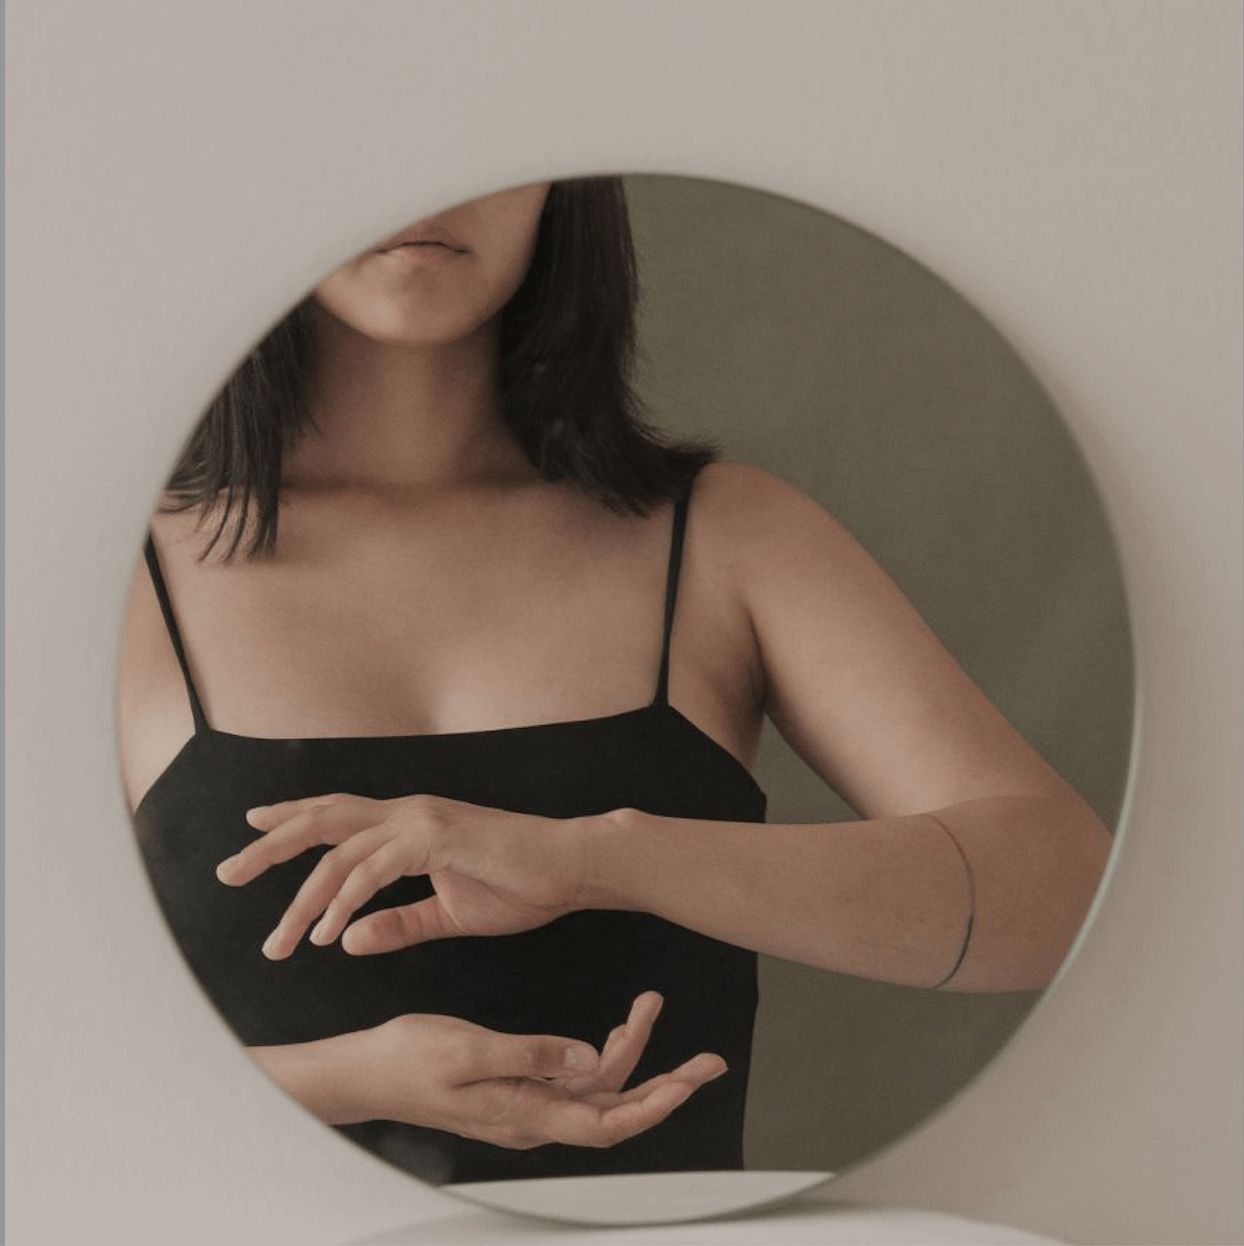 woman in reflection with hands in circle